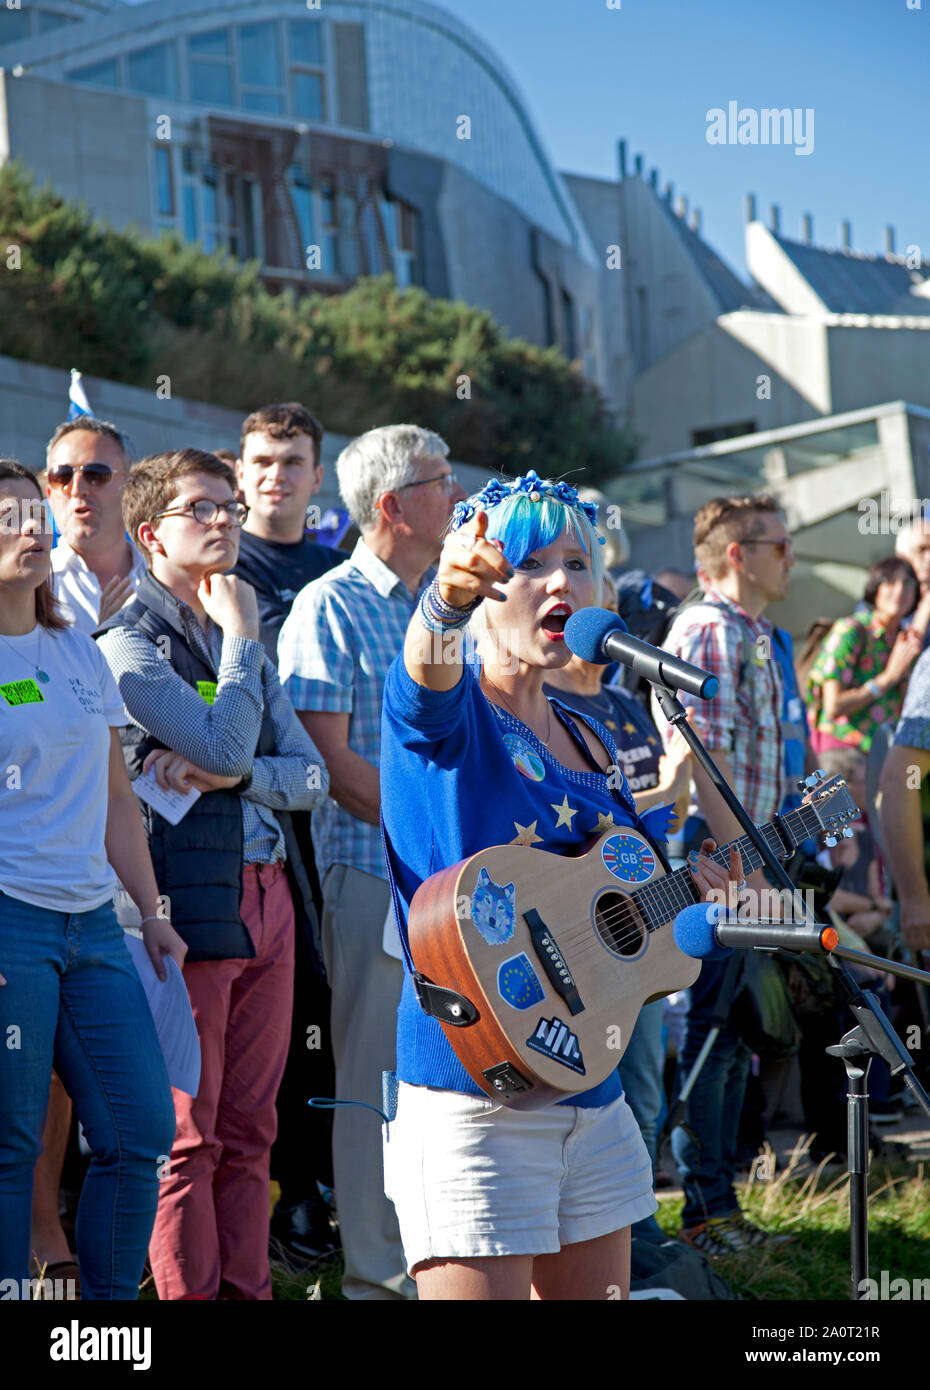 Holyrood Park, Edinburgh, Scotland, UK. 21st September 2019. Rally against Brexit after Royal Mile march, held in Holyrood Park outside Scottish Parliament. Speakers pictured, Madeleina Kay known as #EUsupergirl for her creative campaigning to stop Brexit,who was awarded 'Young European of the Year 2018' by the European Parliament, Stock Photo